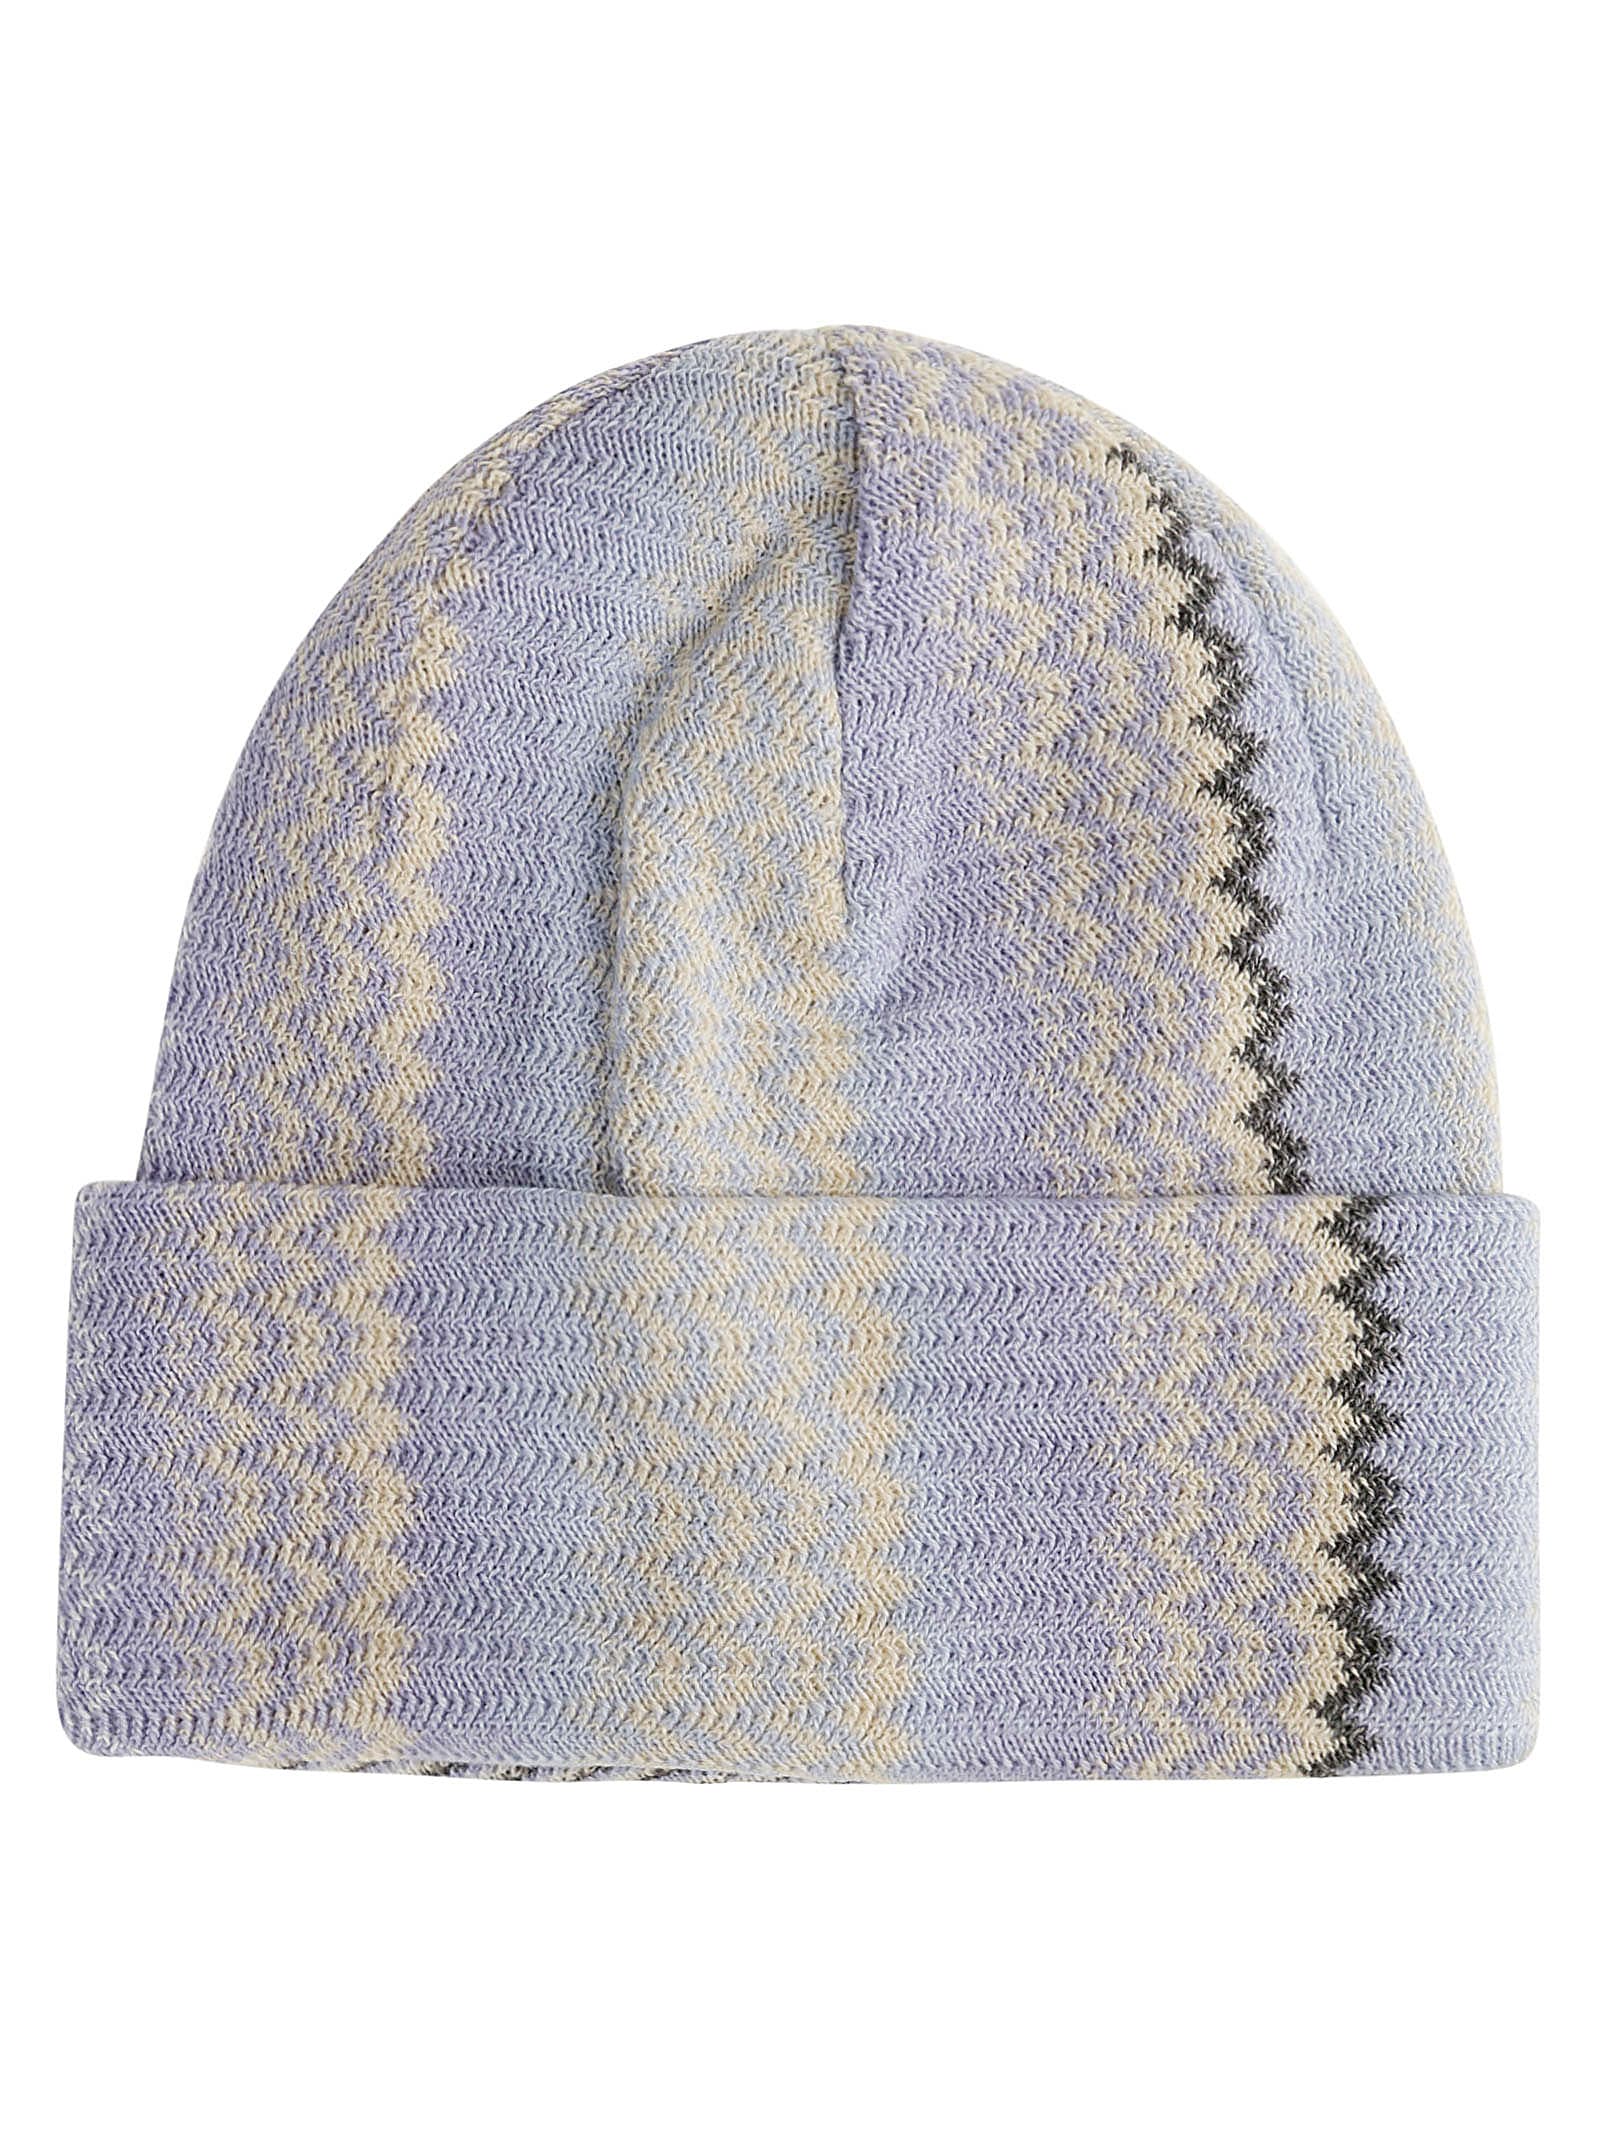 Zigzag Woven Knitted Beanie